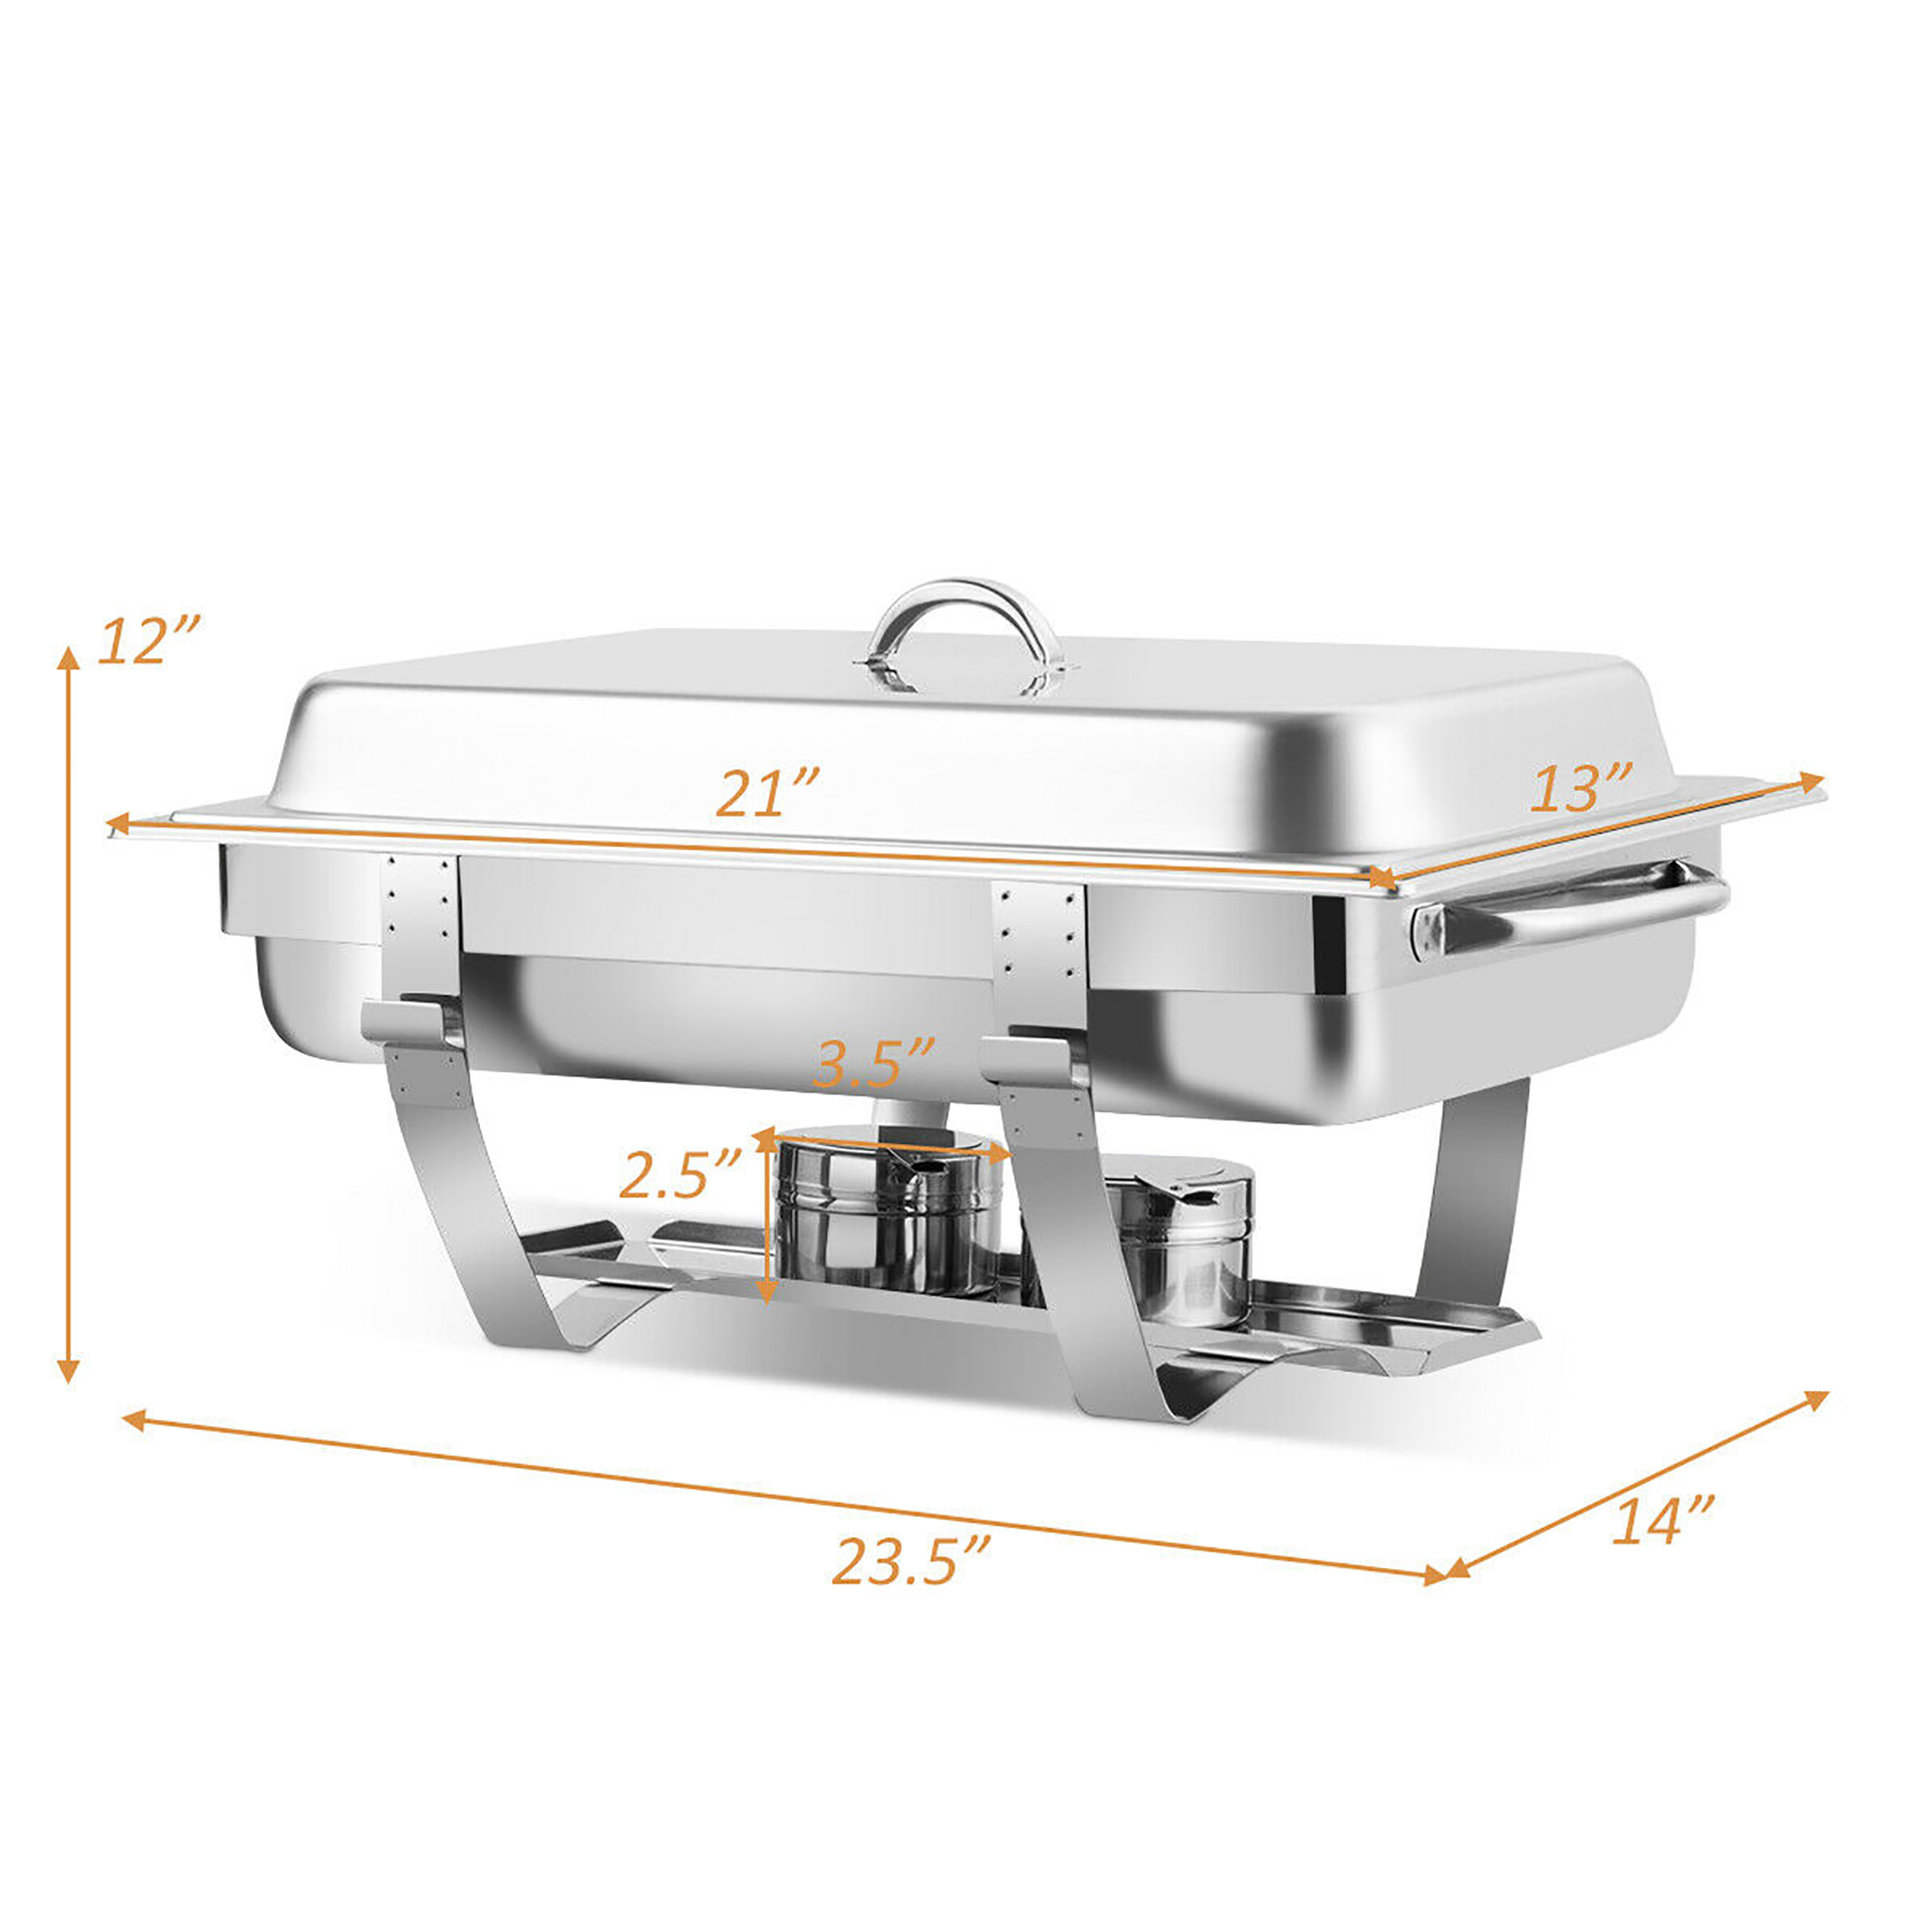 Costway 2 Packs Chafing Dish 9 Quart Chafer Dishes Buffet Set with 2 Half Size Pan